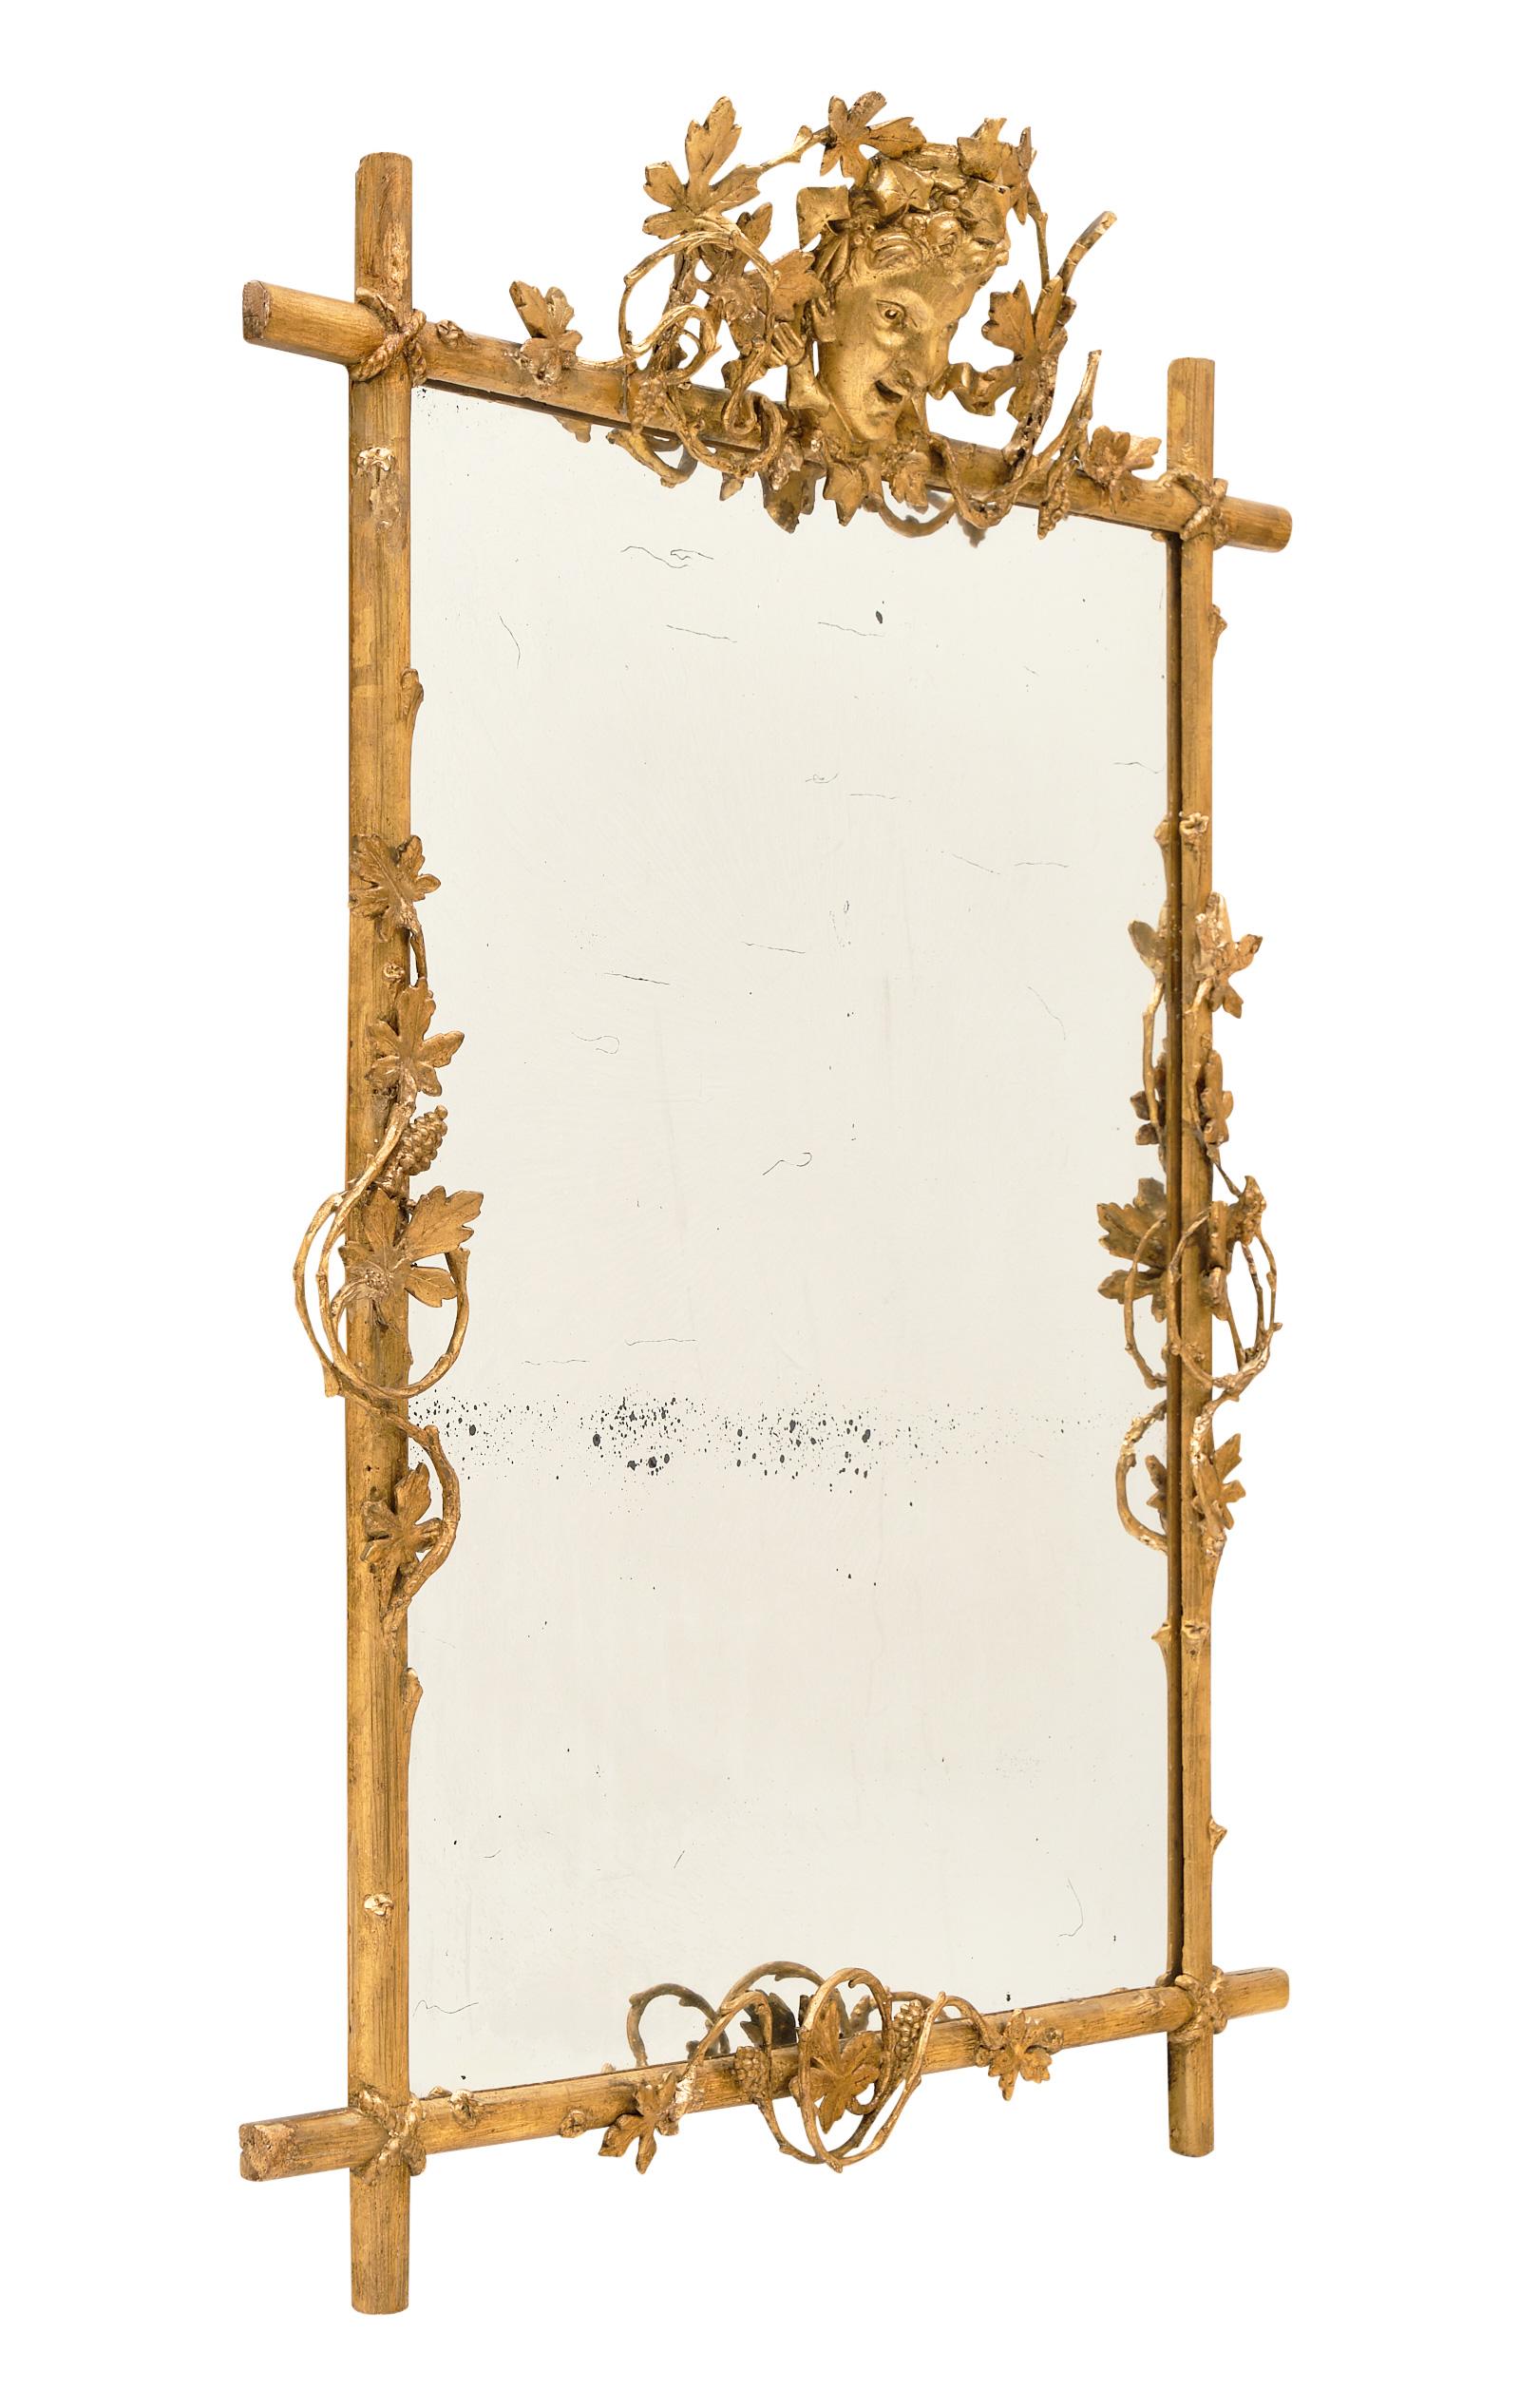 Antique French mirror with Bacchus fronton. This piece has a 23-carat gold leafed, hand carved wood frame with a striking fronton featuring the mask of a young Bacchus, interlaced with bows, grape clusters, wine canes and branches. This unique